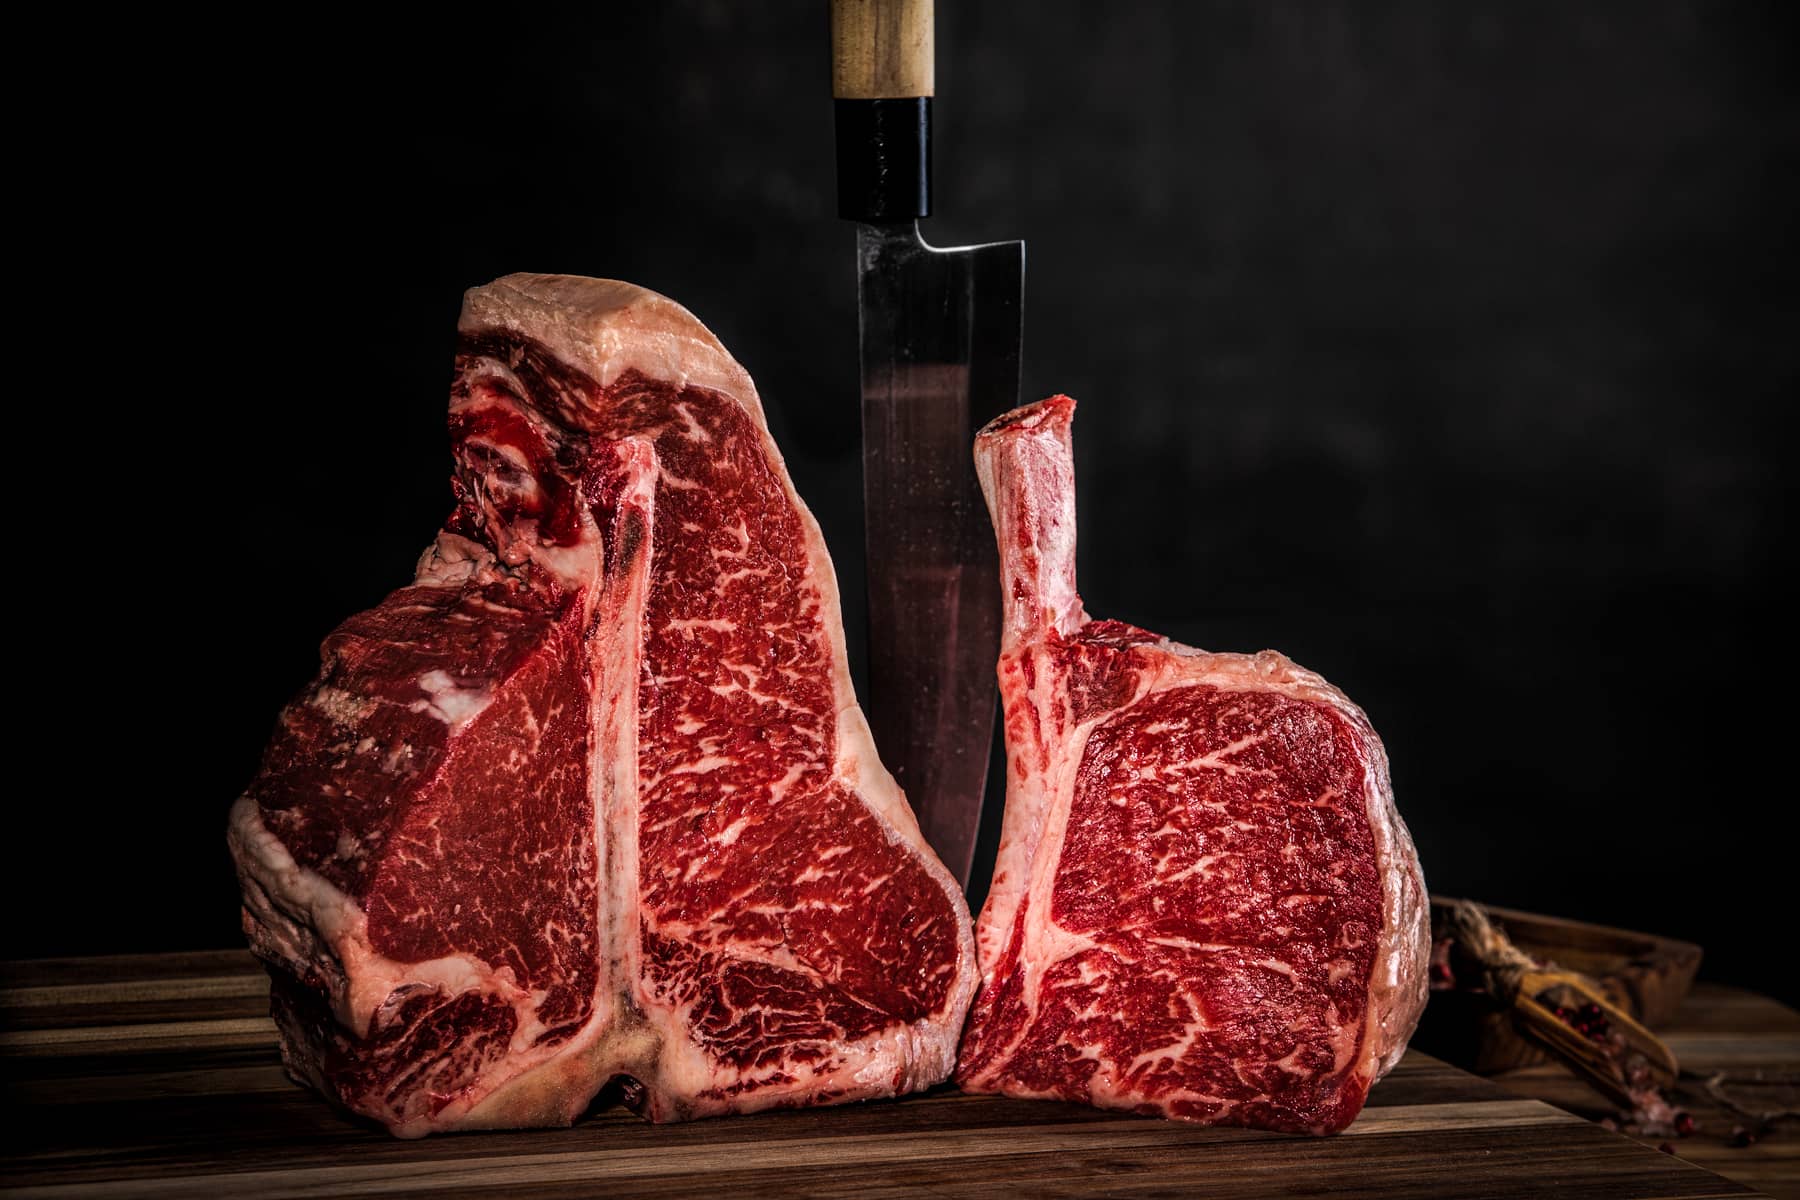 Two succulent bone-in steaks, perfect for a luxurious steak and seafood dinner.